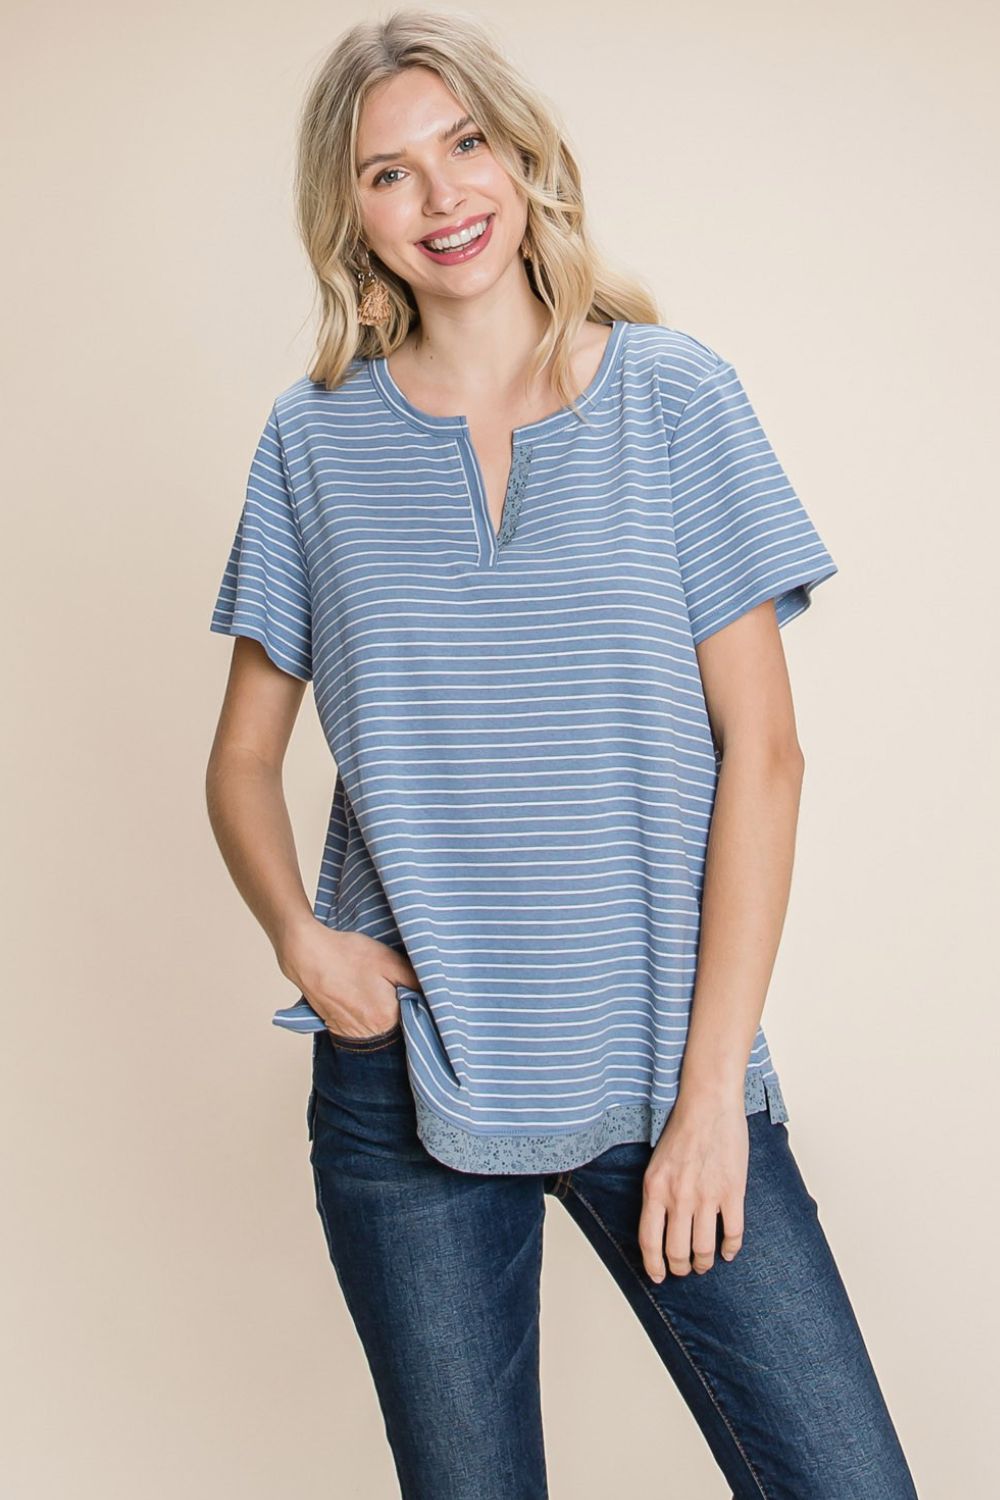 Striped Notched Short Sleeve T-Shirt - Trendy Cotton Bleu Design by Nu Lab, Perfect for Casual Wear with Slit Detailing